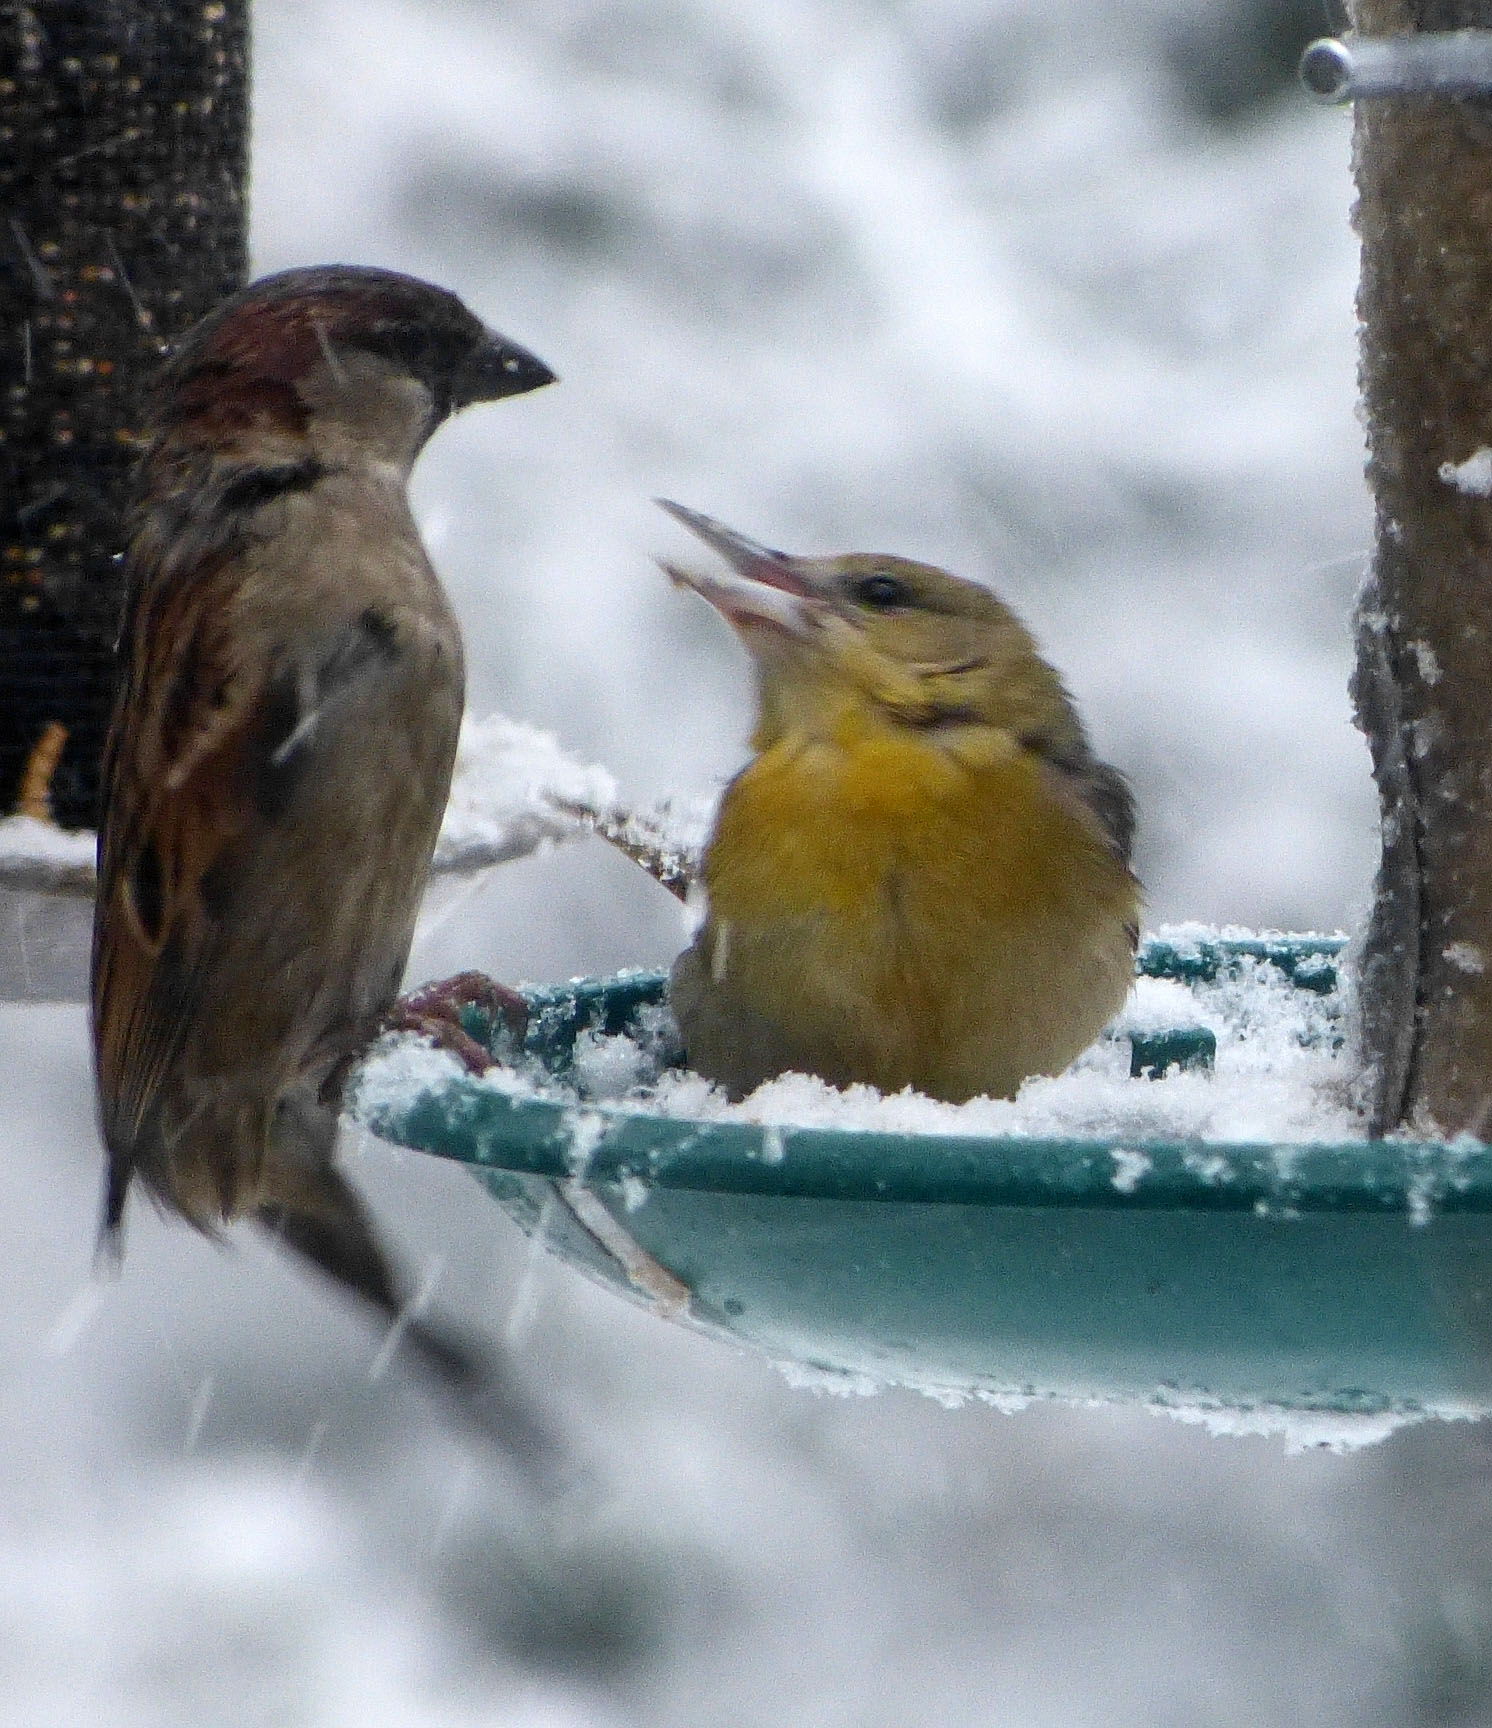 Female Baltimore Oriole at my feeder, defending her territory from an aggressive House Sparrow during the big storm.